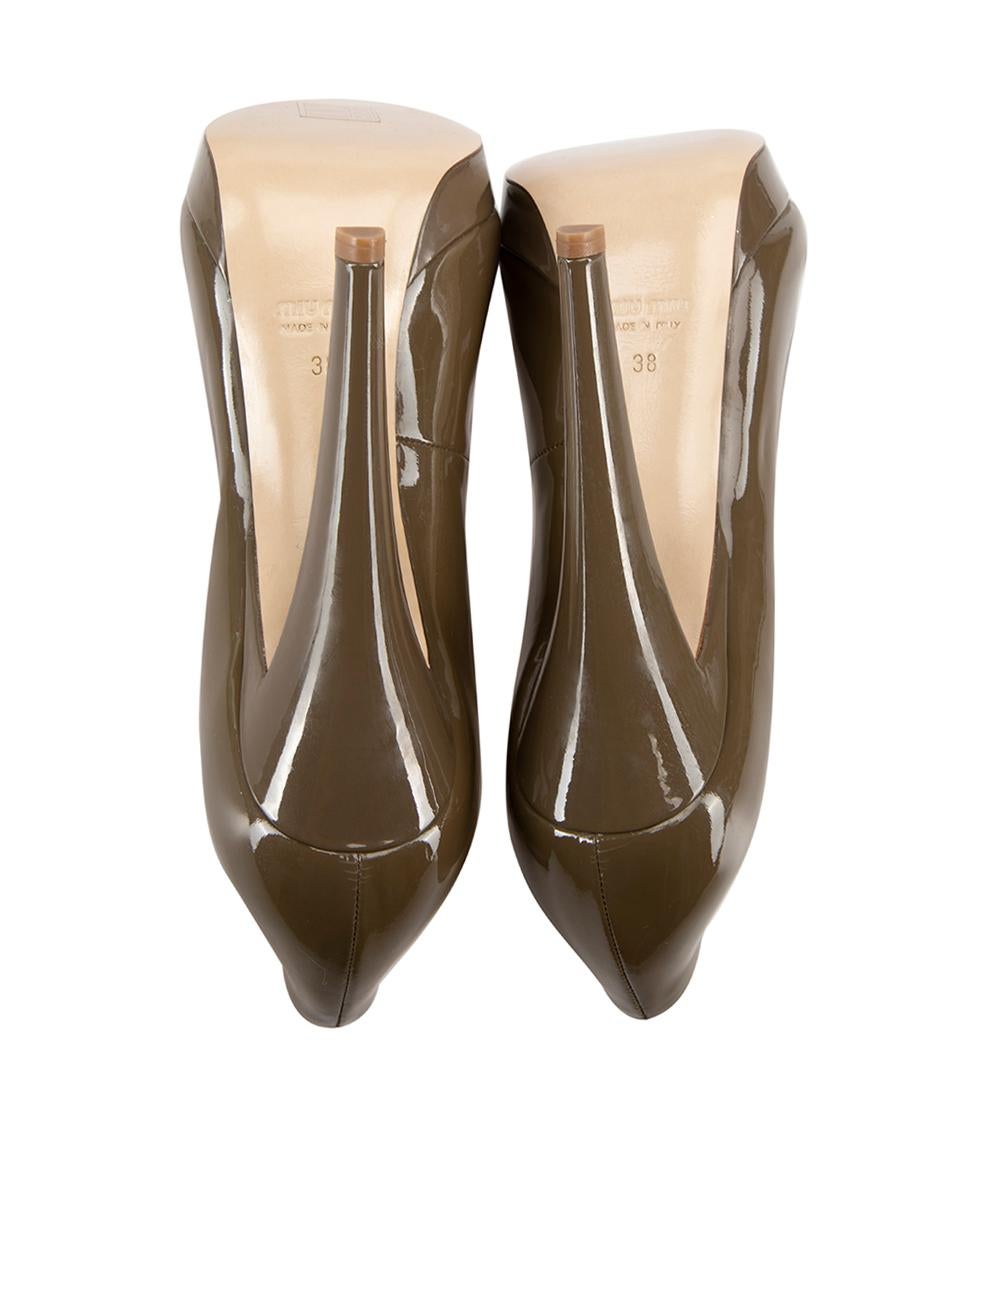 Khaki Patent Platform Calzature Donna Pumps Size IT 38 In Good Condition For Sale In London, GB